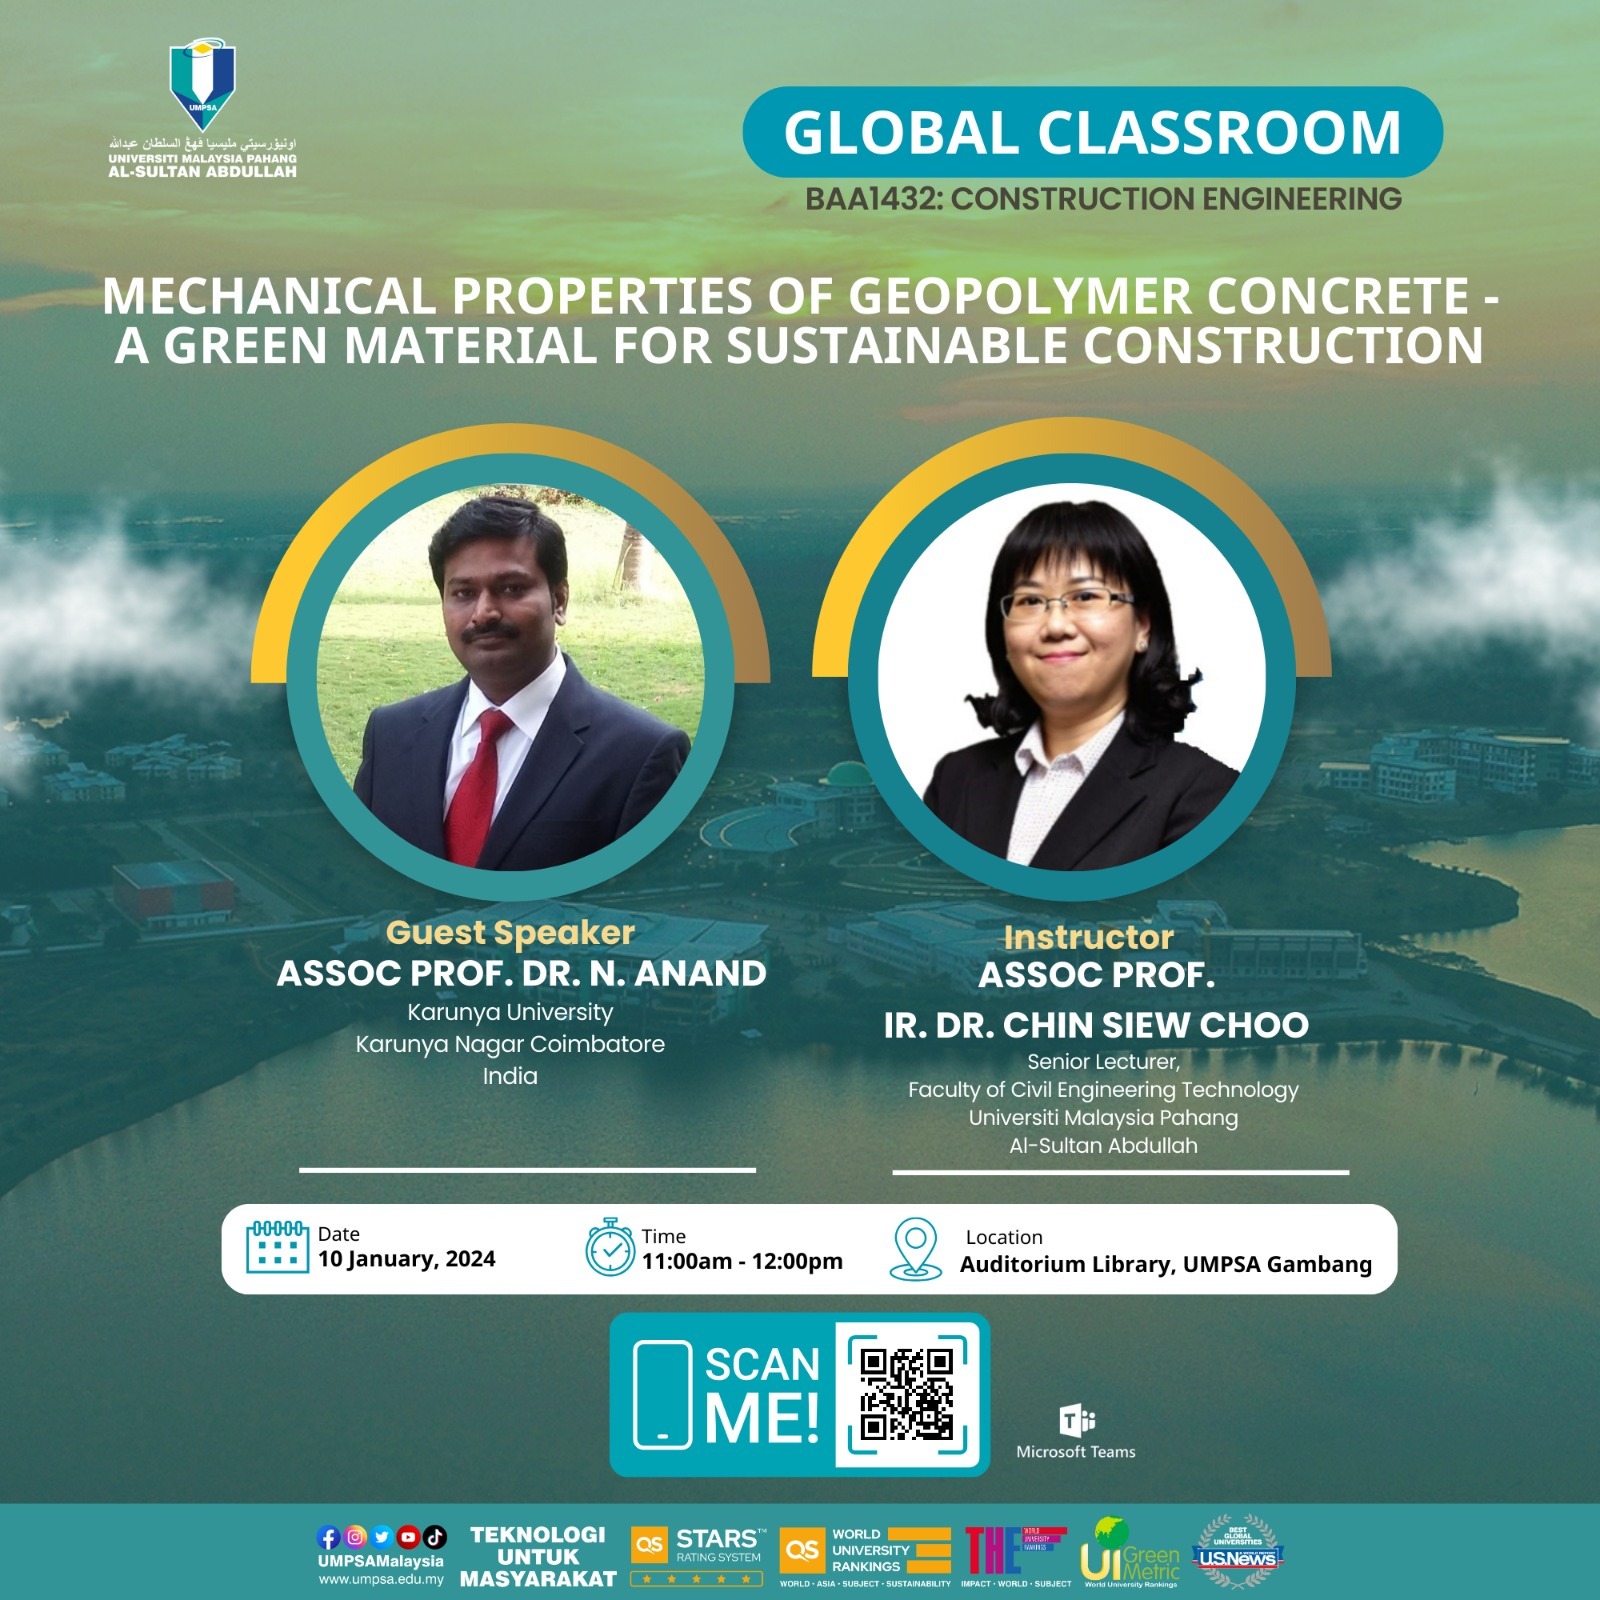 Global Classroom for BAA1432 Subject: Mechanical Properties of Geopolymer Concrete -  A Green Material for Sustainable Construction on 9th December 2023 conducted by Associate Prof. Dr. Chin Siew Choo, FCET, UMPSA 